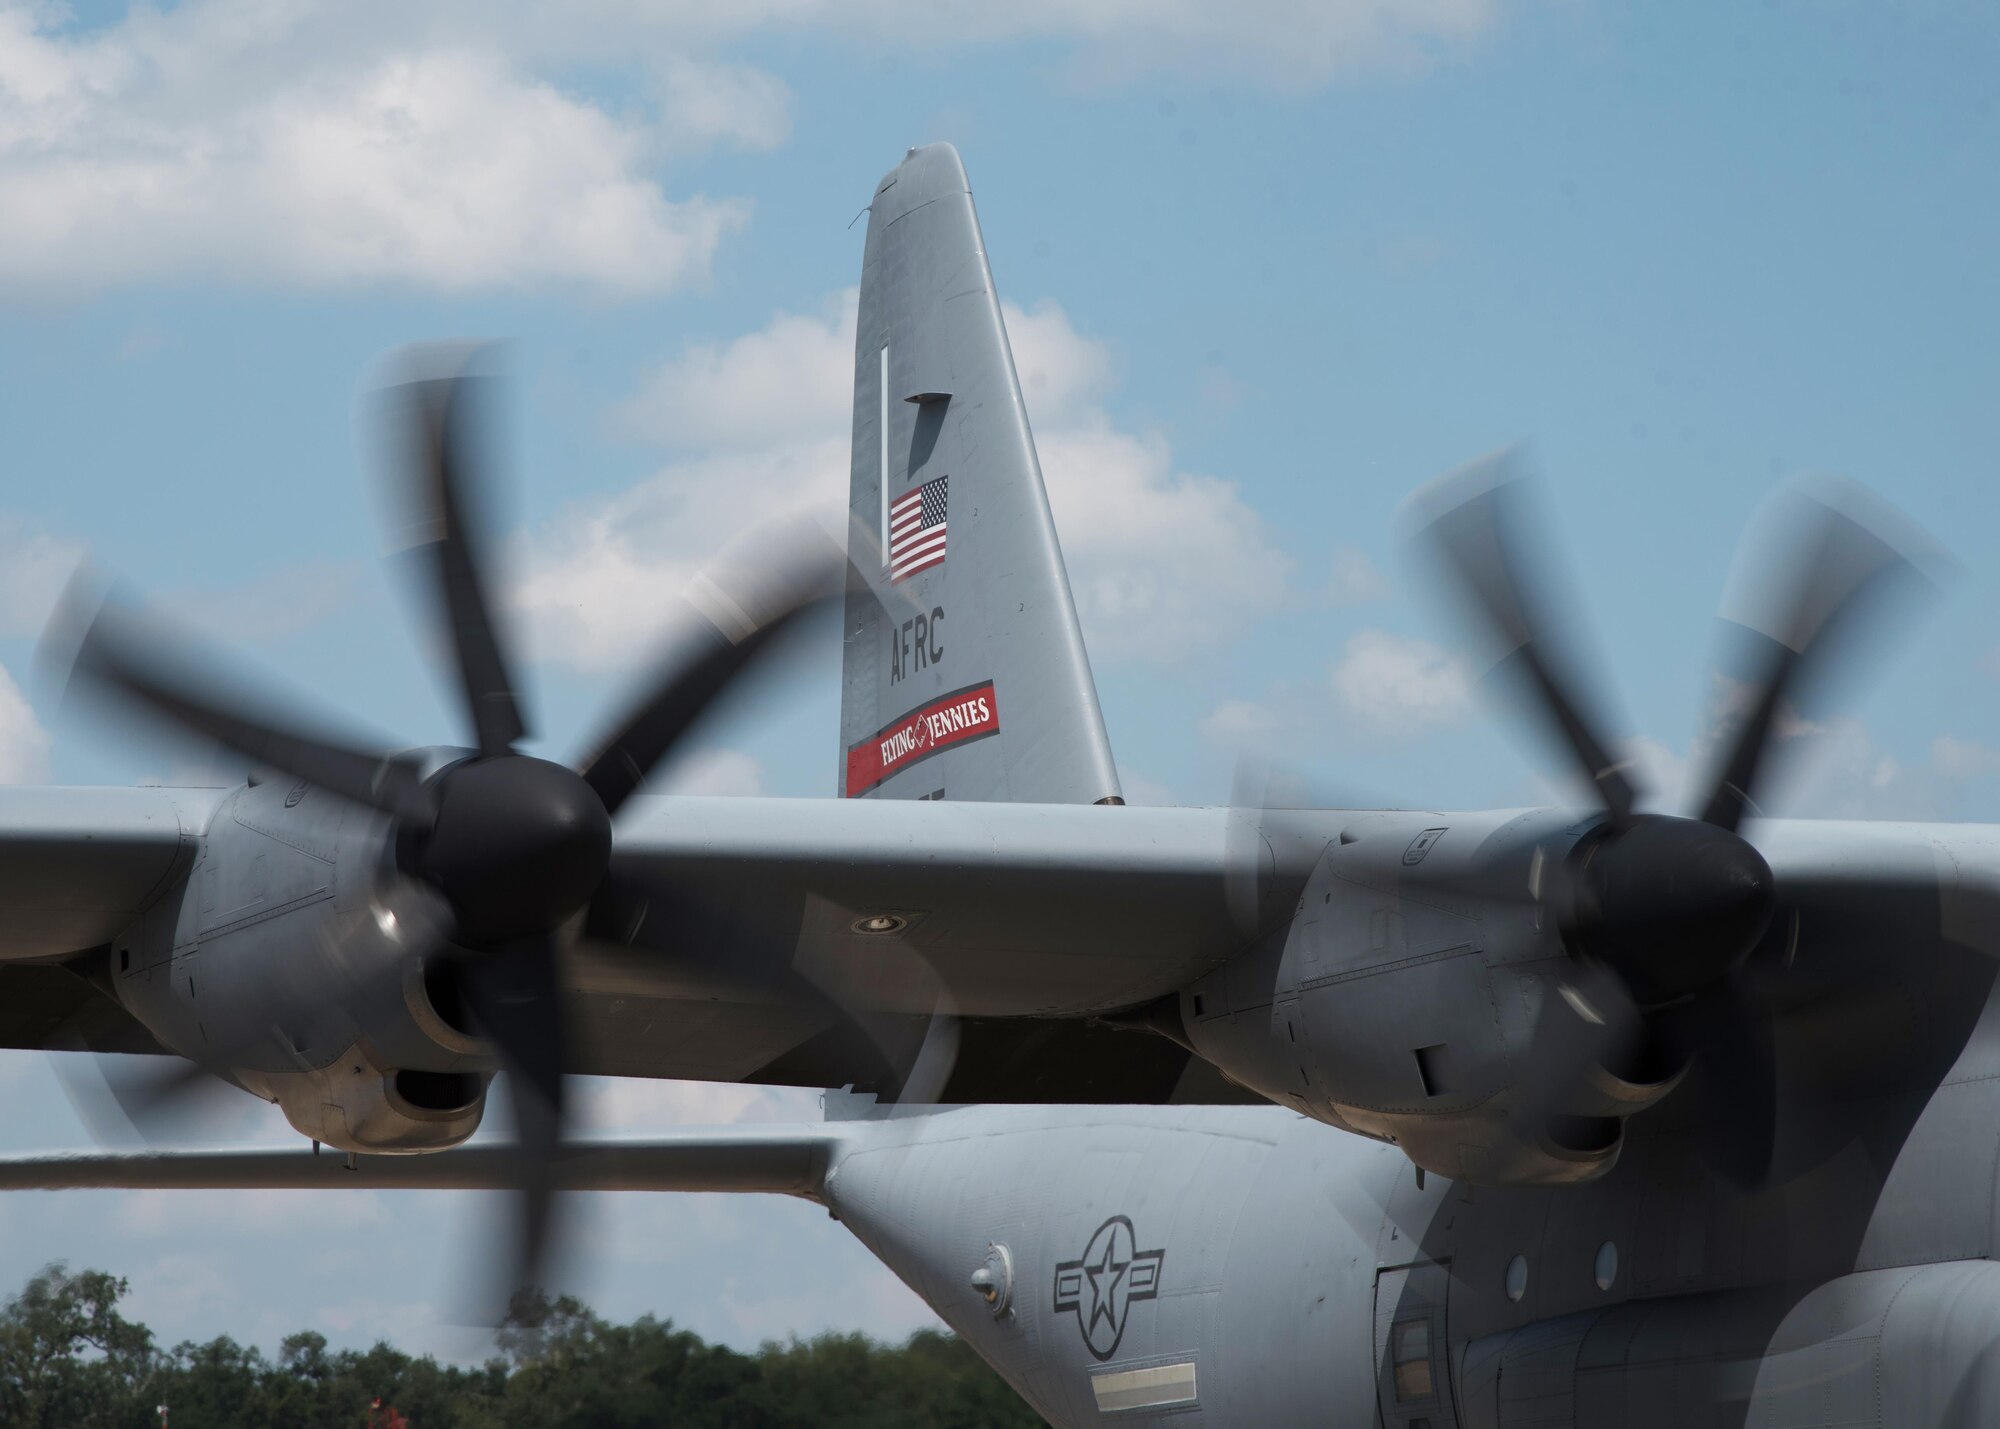 The U.S. Air Force Reserve’s 403rd Wing sent an 815th Airlift Squadron C-130J Super Hercules aircrew to MacDill Air Force Base, Florida Sept.23, 2017 to support relief operations for Hurricane Maria. The 815th AS crew was staged there with other C-130 and C-17 Globemaster III aircraft from other units to assist with recovery efforts. (U.S. Air Force photo/Staff Sgt. Shelton Sherrill)